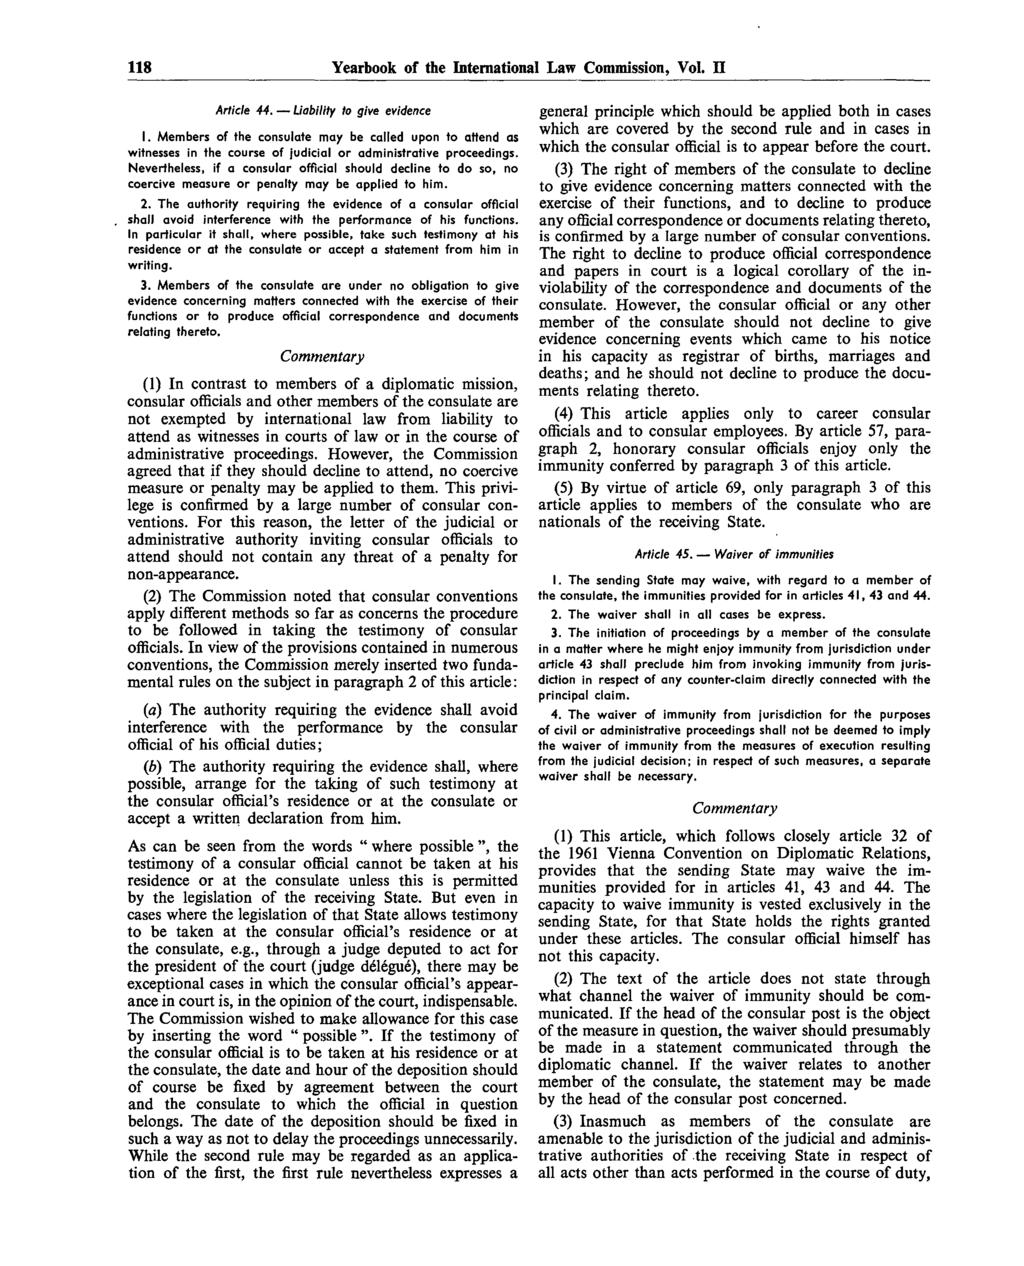 118 Yearbook of the International Law Commission, Vol. II Article 44. Liability to give evidence 1.